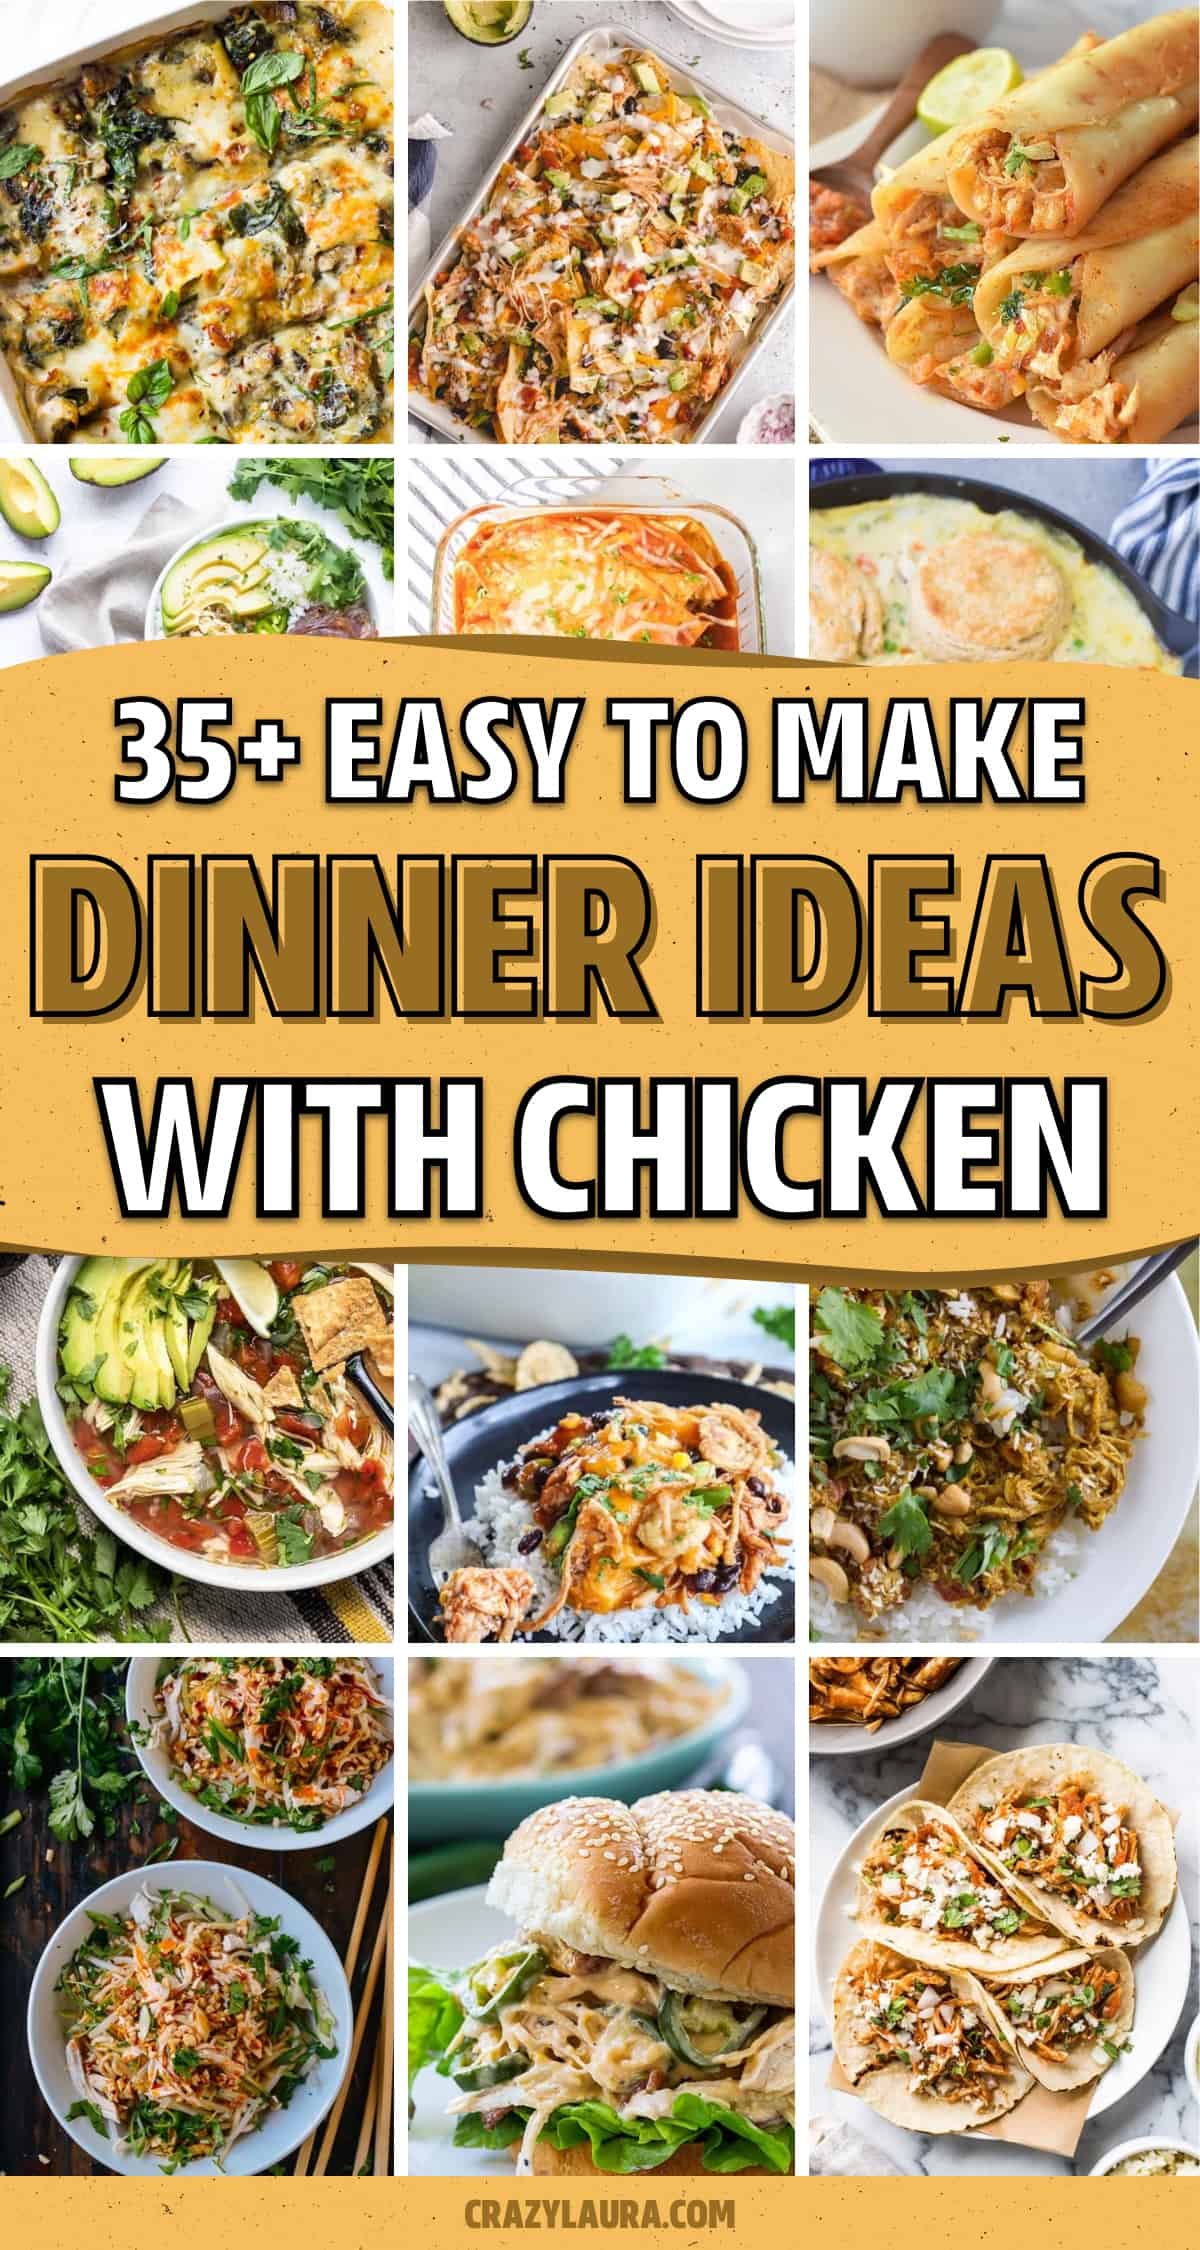 dinner ideas to make at home with chicken